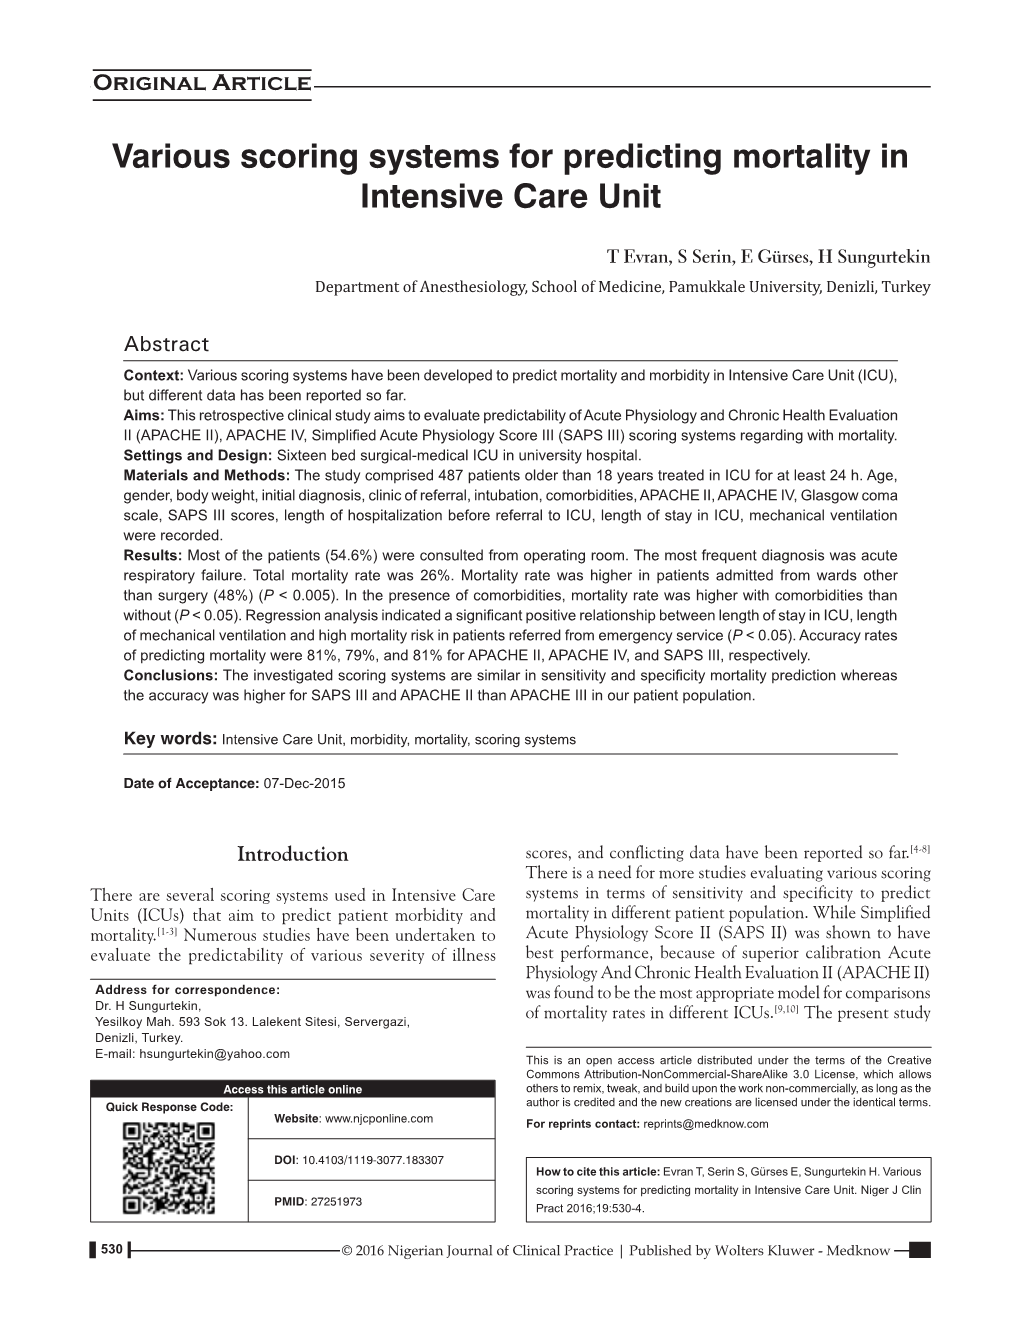 Various Scoring Systems for Predicting Mortality in Intensive Care Unit